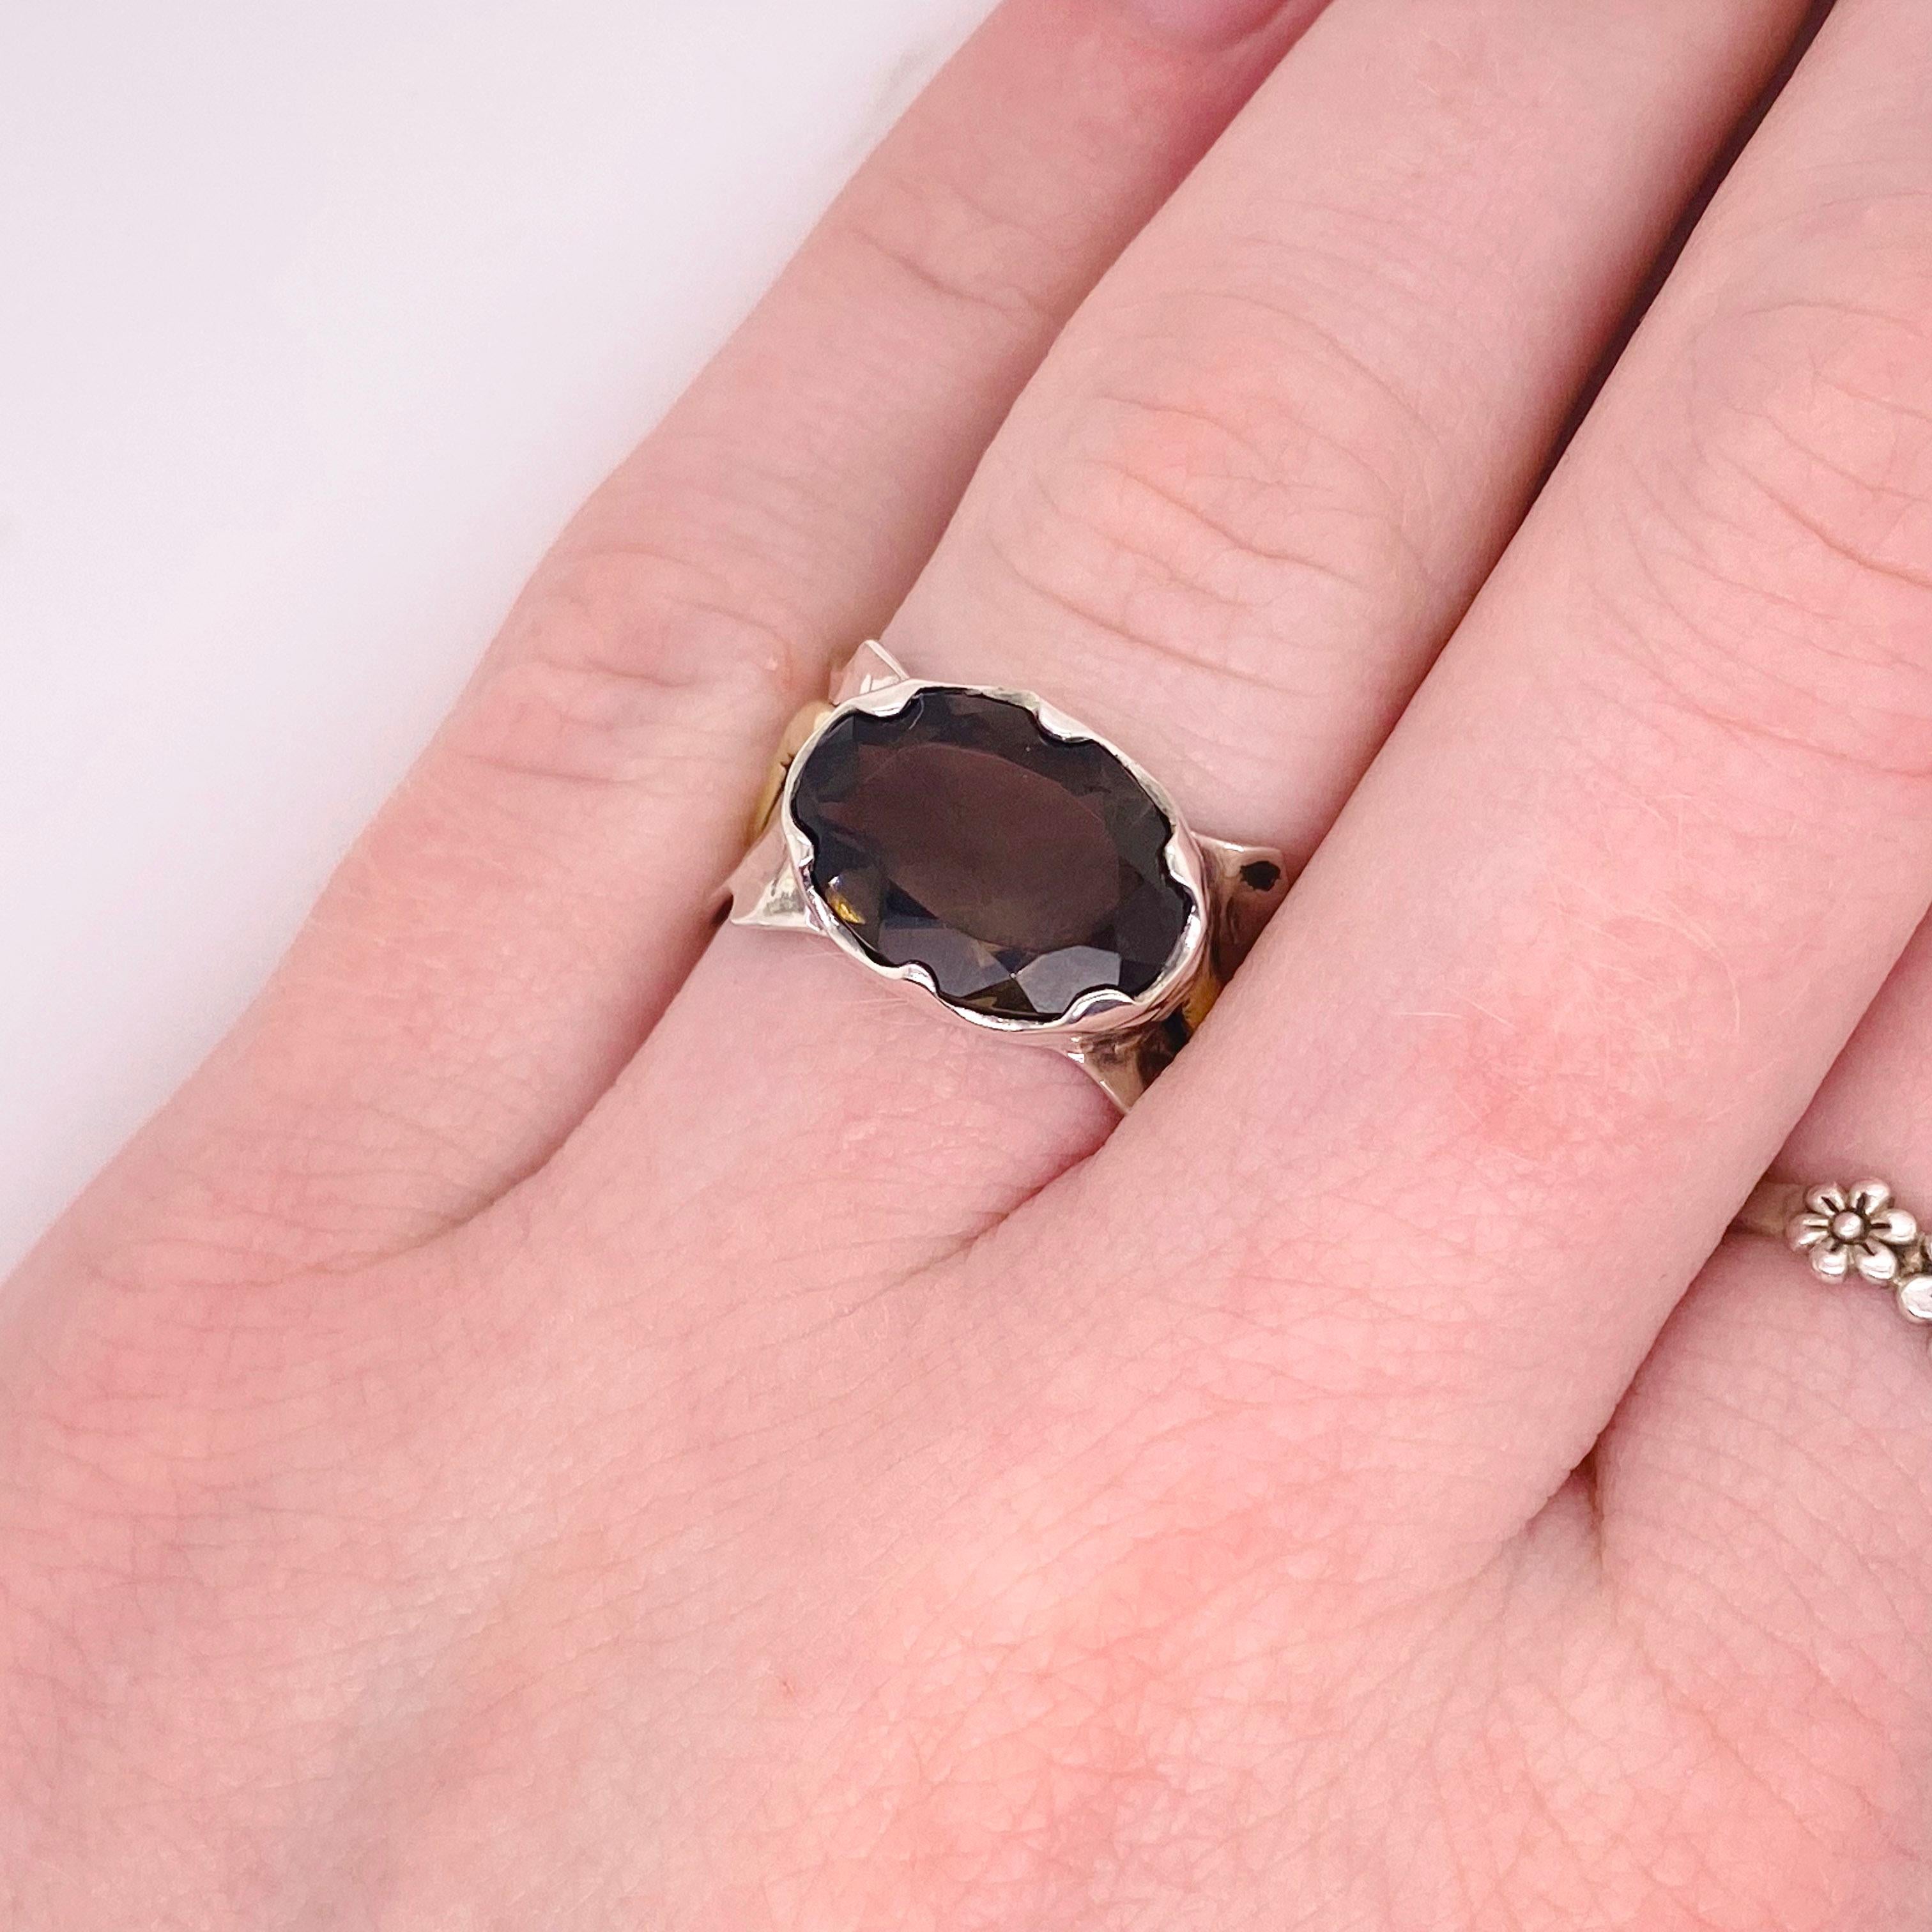 Do you want something unique but very affordable! This genuine smokey topaz is 4 carats and set with a scalloped edge. The ring has a gold accent to make it a mixed metal look. This ring is a size 7 but can be adjusted from size 5 to 9. The details